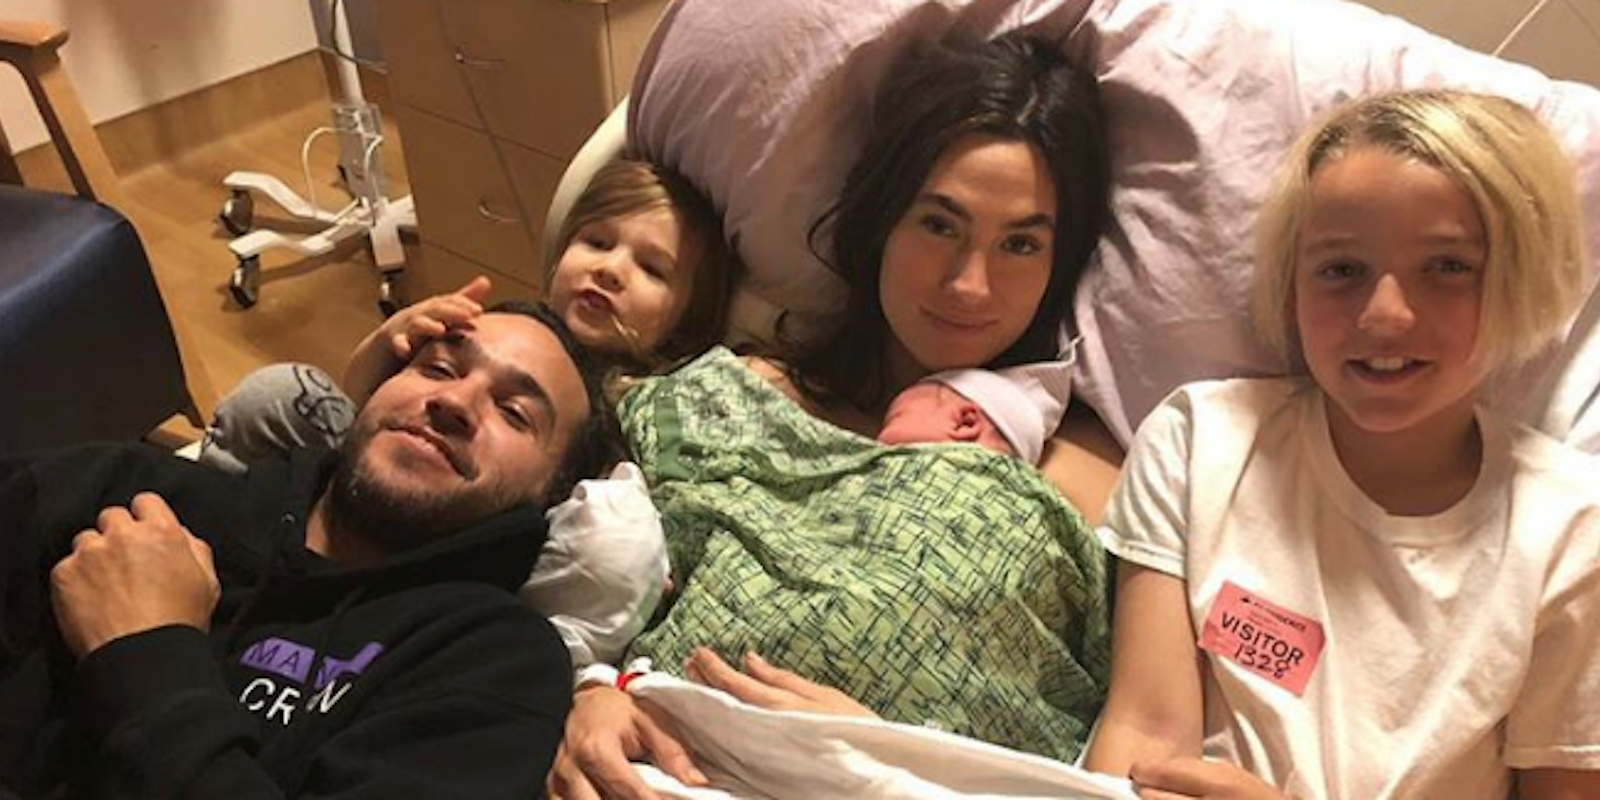 Pete Wentz and family welcome baby Marvel